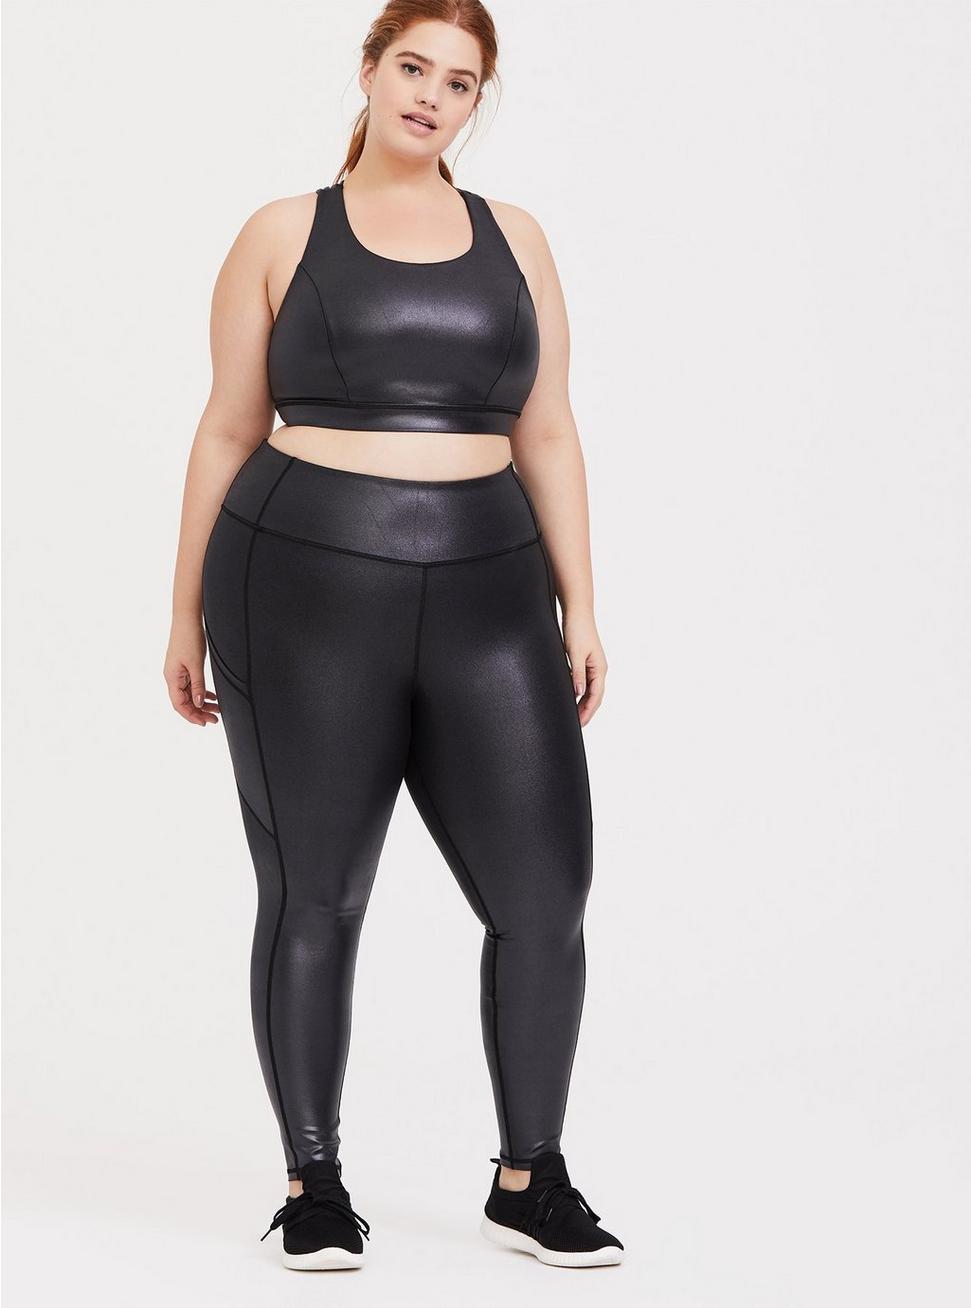 Plus Size - Black Sparkle Coated Wicking Active Legging with Pockets ...